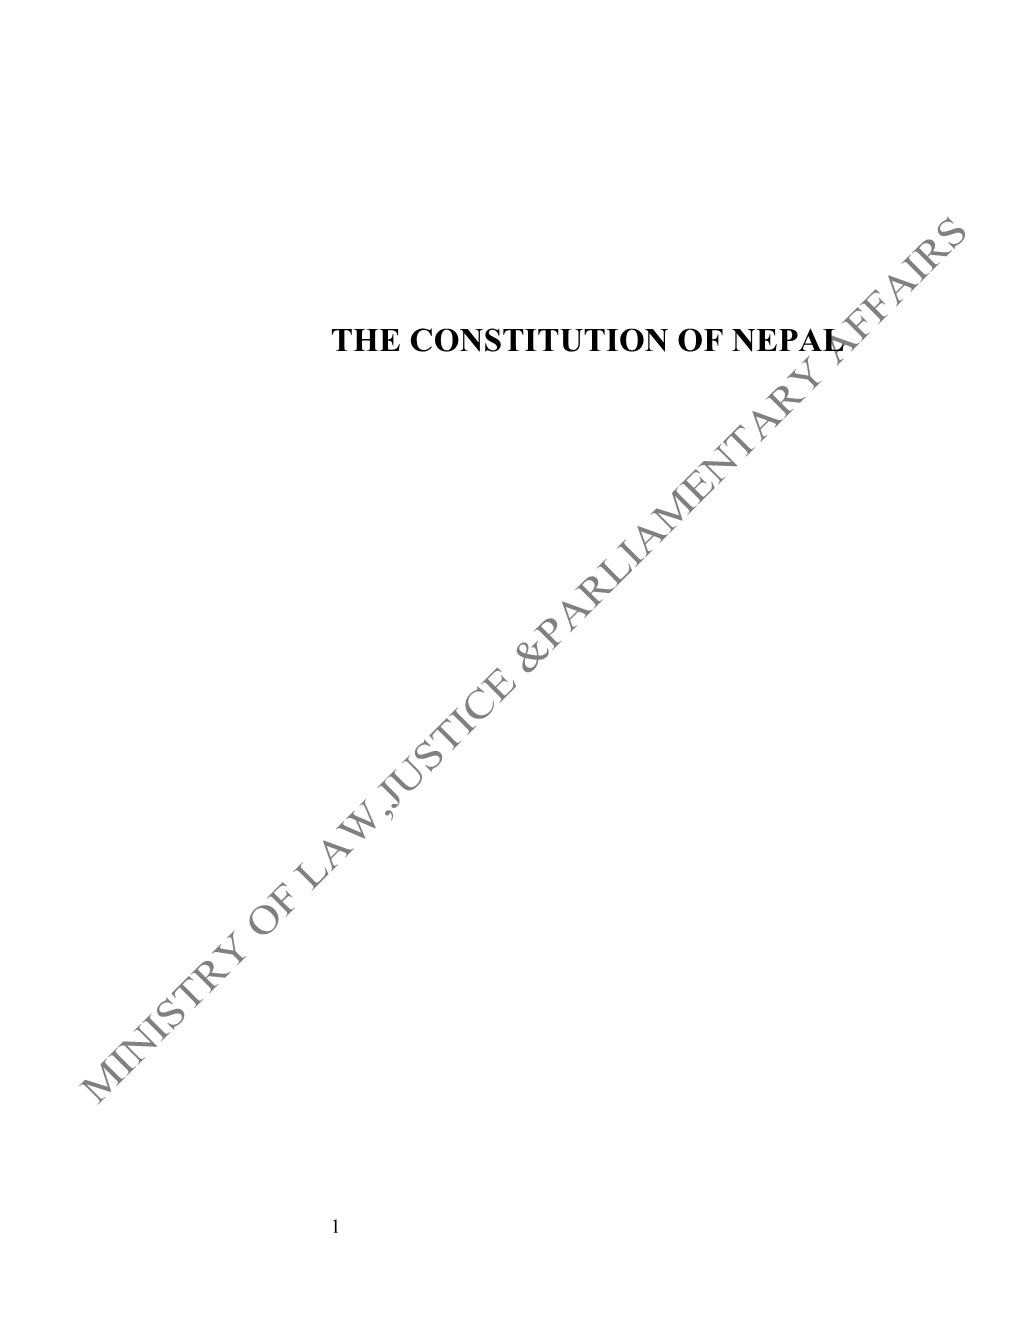 The Constitution of Nepal